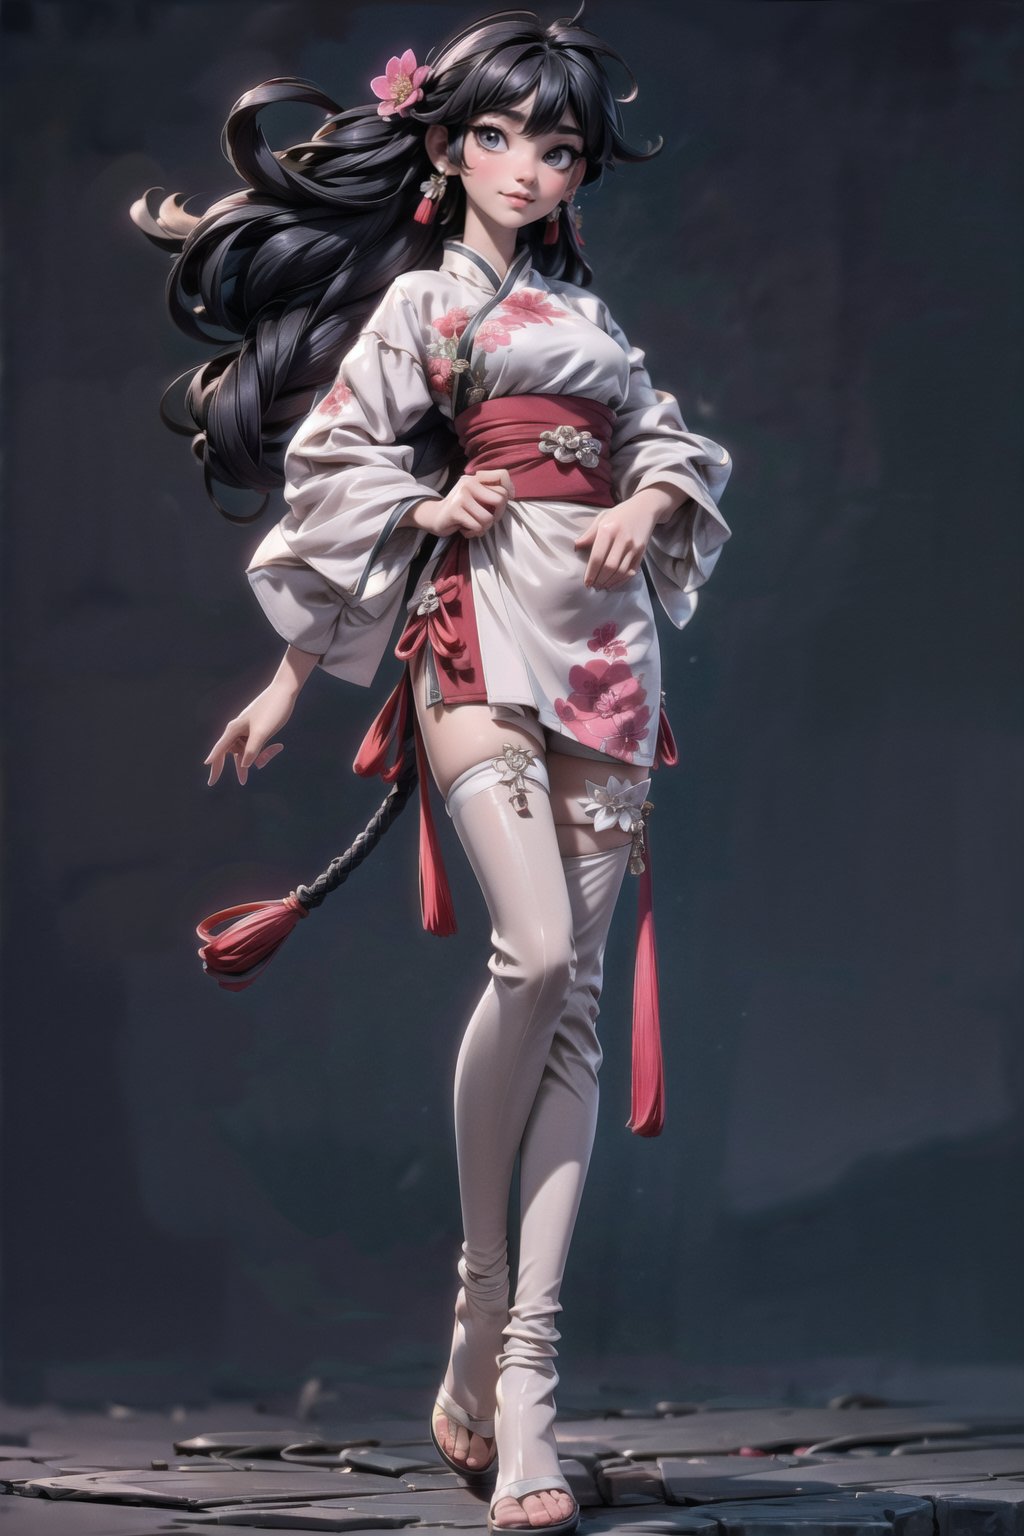 Sitting on the mecha, Flower lanterns, Strong winds, (((Wind blows long hair and dress: 1.9)), Long hair reaching the waist, (long hair flying: 1.5), Thin gauze semi transparent ancient clothing, Tang clothing, Han clothing. Thin gauze semi transparent red skirt. The skirt is very long. (((Night: 1.9))). Women, smiling, full chested, red tulle semi transparent Hanfu, bare feet, silver jewelry, elegant, lightweight, confident, flower posture, wisdom, charming charm, purity, nobility, artistry, beauty, (best quality), masterpiece, highlights, (original), extremely detailed wallpaper, (original: 1.5), (masterpiece: 1.3), (high resolution: 1.3), (an extremely detailed 32k wallpaper: 1.3), (best quality), Highest image quality, exquisite CG, high quality, high completion, depth of field, (1 girl: 1.5), (an extremely delicate and beautiful girl: 1.5), (perfect whole body details: 1.5), beautiful and delicate nose, beautiful and delicate lips, beautiful and delicate eyes, (clear eyes: 1.3), beautiful and delicate facial features, beautiful and delicate face, hand processing, hand optimization, hand detail optimization, hand detail processing, detailed beautiful clothes, complex details, Extreme detail portrayal, HDR, detailed background, realistic, (transparent PViridescent colors: 1.3),1girl,girl,Chinese art,Super long legs,2D conceptual design,Pink Machine,spread leg,machinery,shidudou,Naked apron,huliya,Naked Qipao,SEE-THROUGH KIMONO,SAM YANG,3DMM,1girl, roujinzhi,zhongfenghua